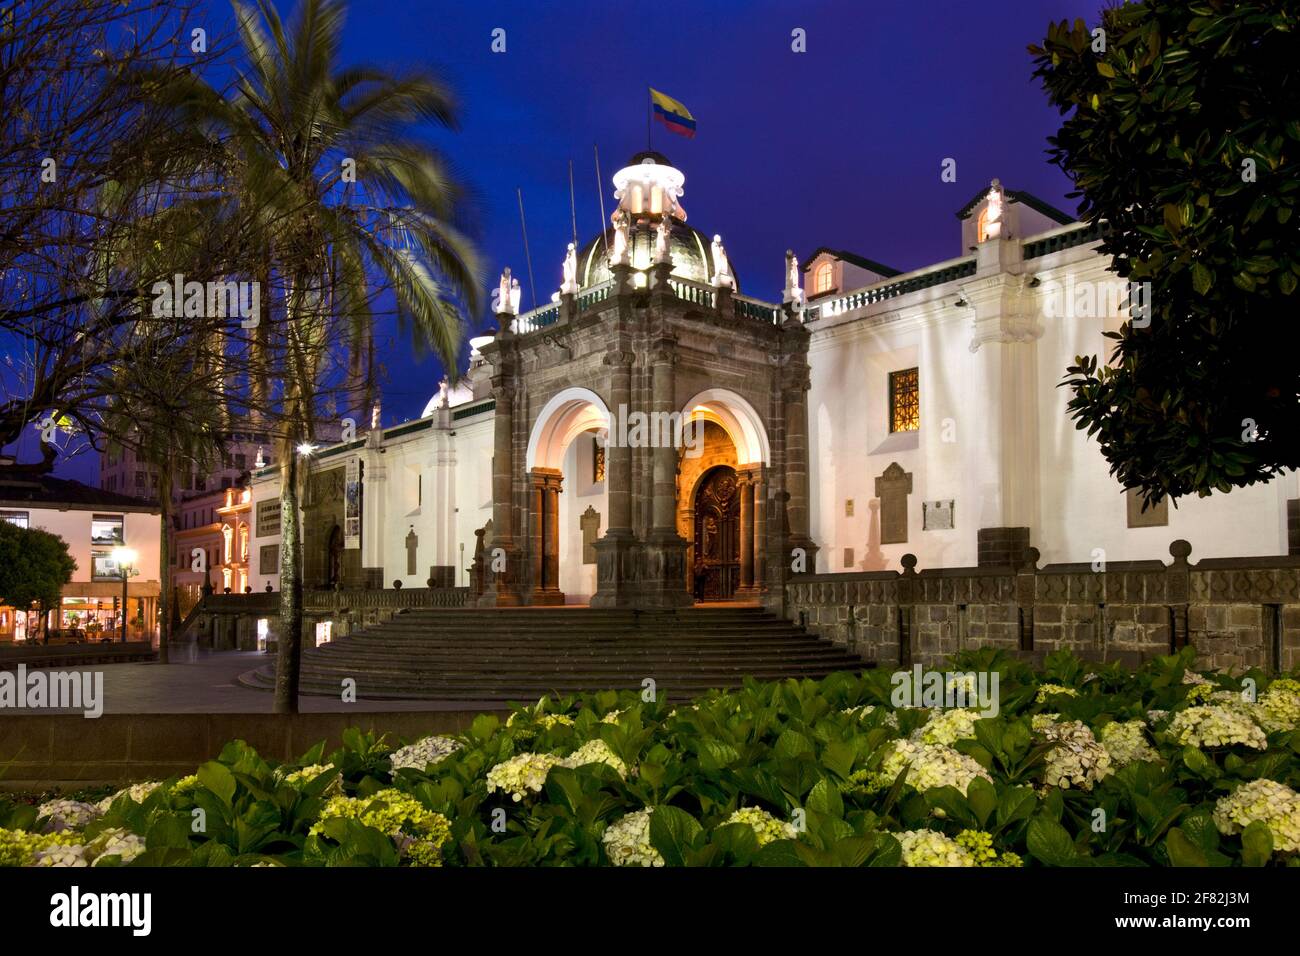 The Catedral (Cathedral) in Plaza de la Independencia in the city of Quito in Ecuador, South America. Stock Photo